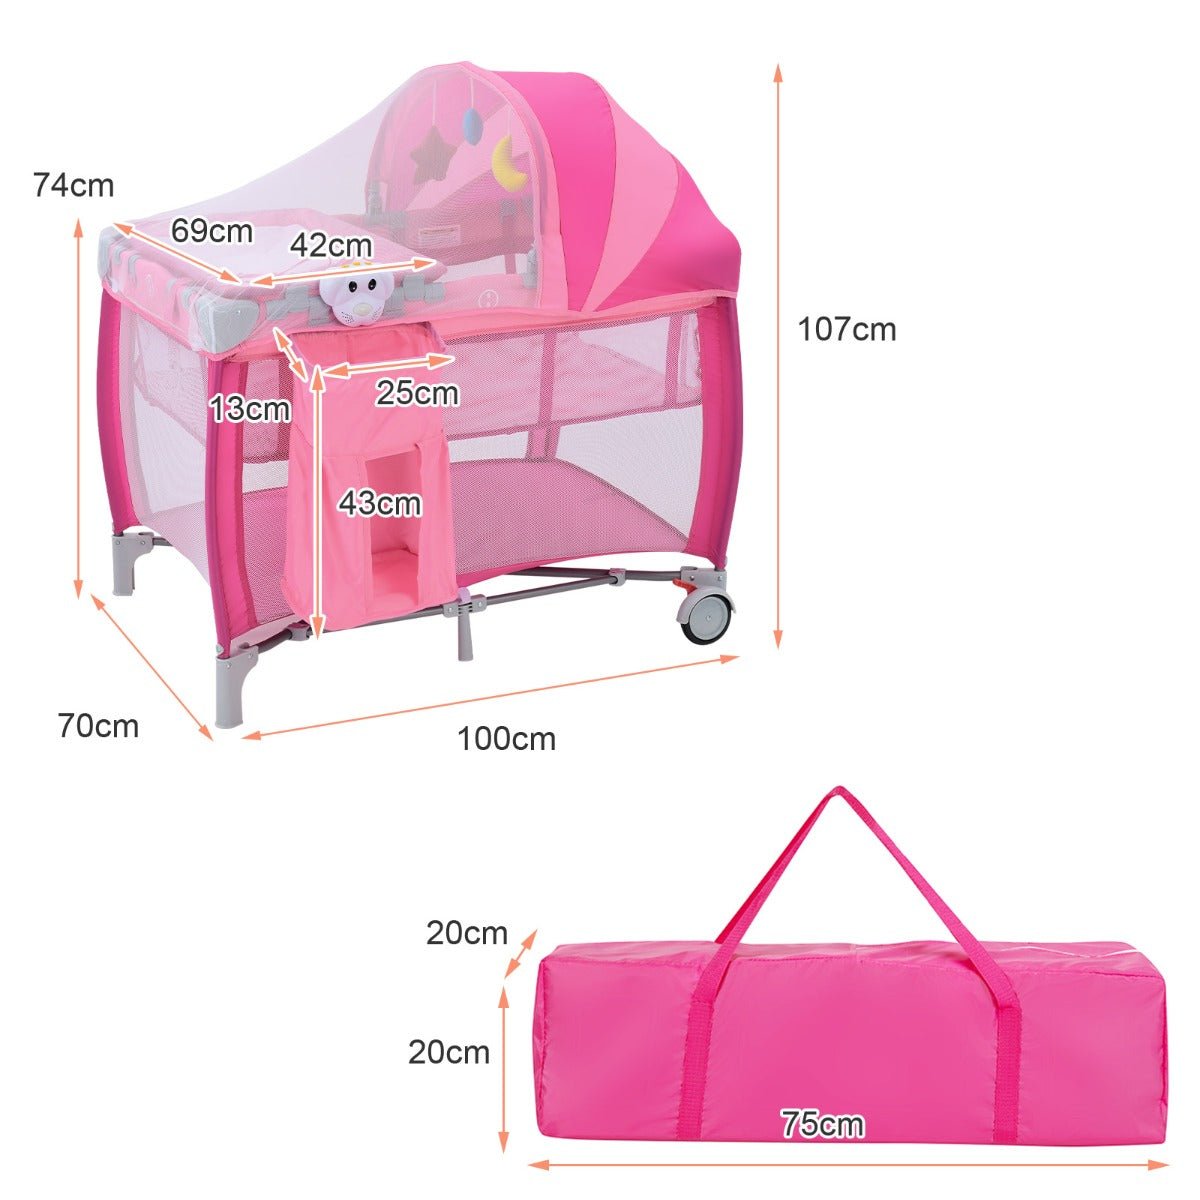 Portable Baby Portacot with Detachable Net - Adaptation and Secure Rest